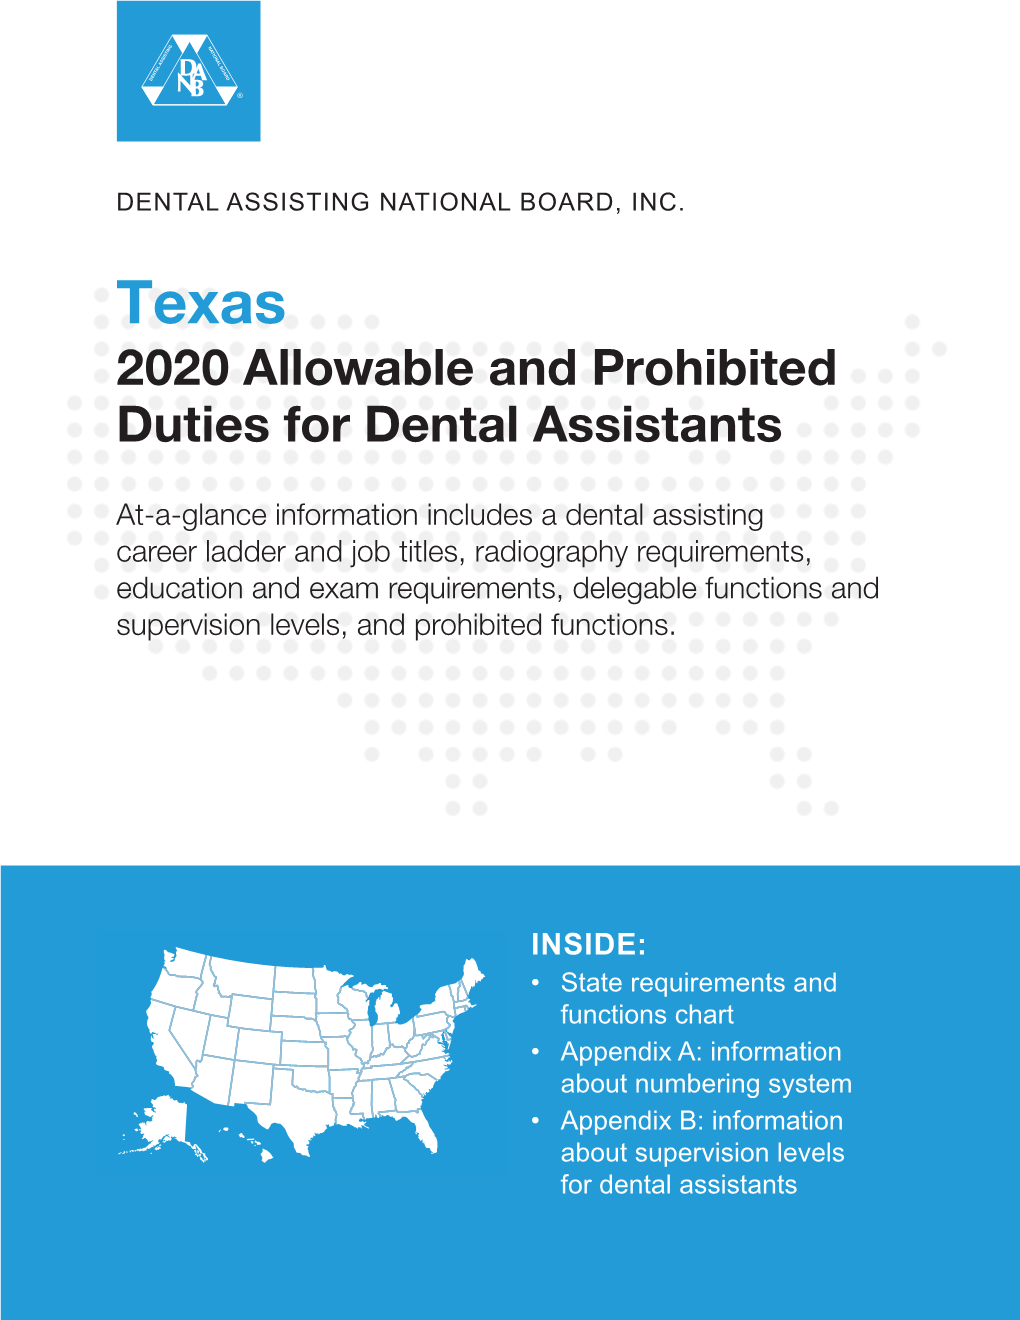 Texas 2020 Allowable and Prohibited Duties for Dental Assistants